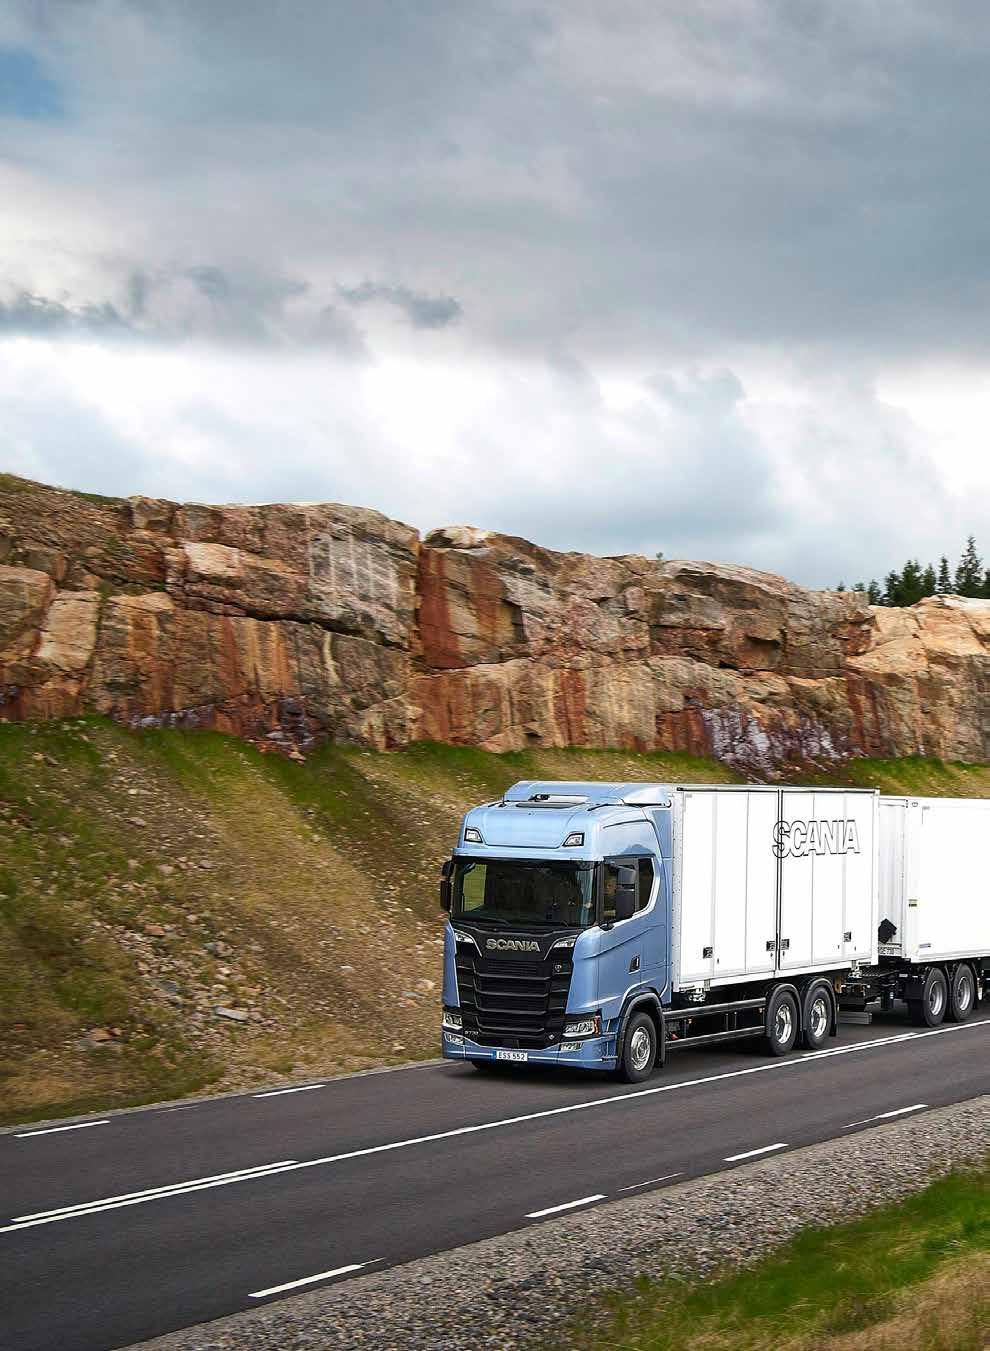 THIS IS ERICSSON Ericsson s Connected Vehicle Marketplace PROFIT IMPROVEMENT THE MARKET Scania and Ericsson have advanced the cooperation in 5G and connectivity research for commercial vehicles and